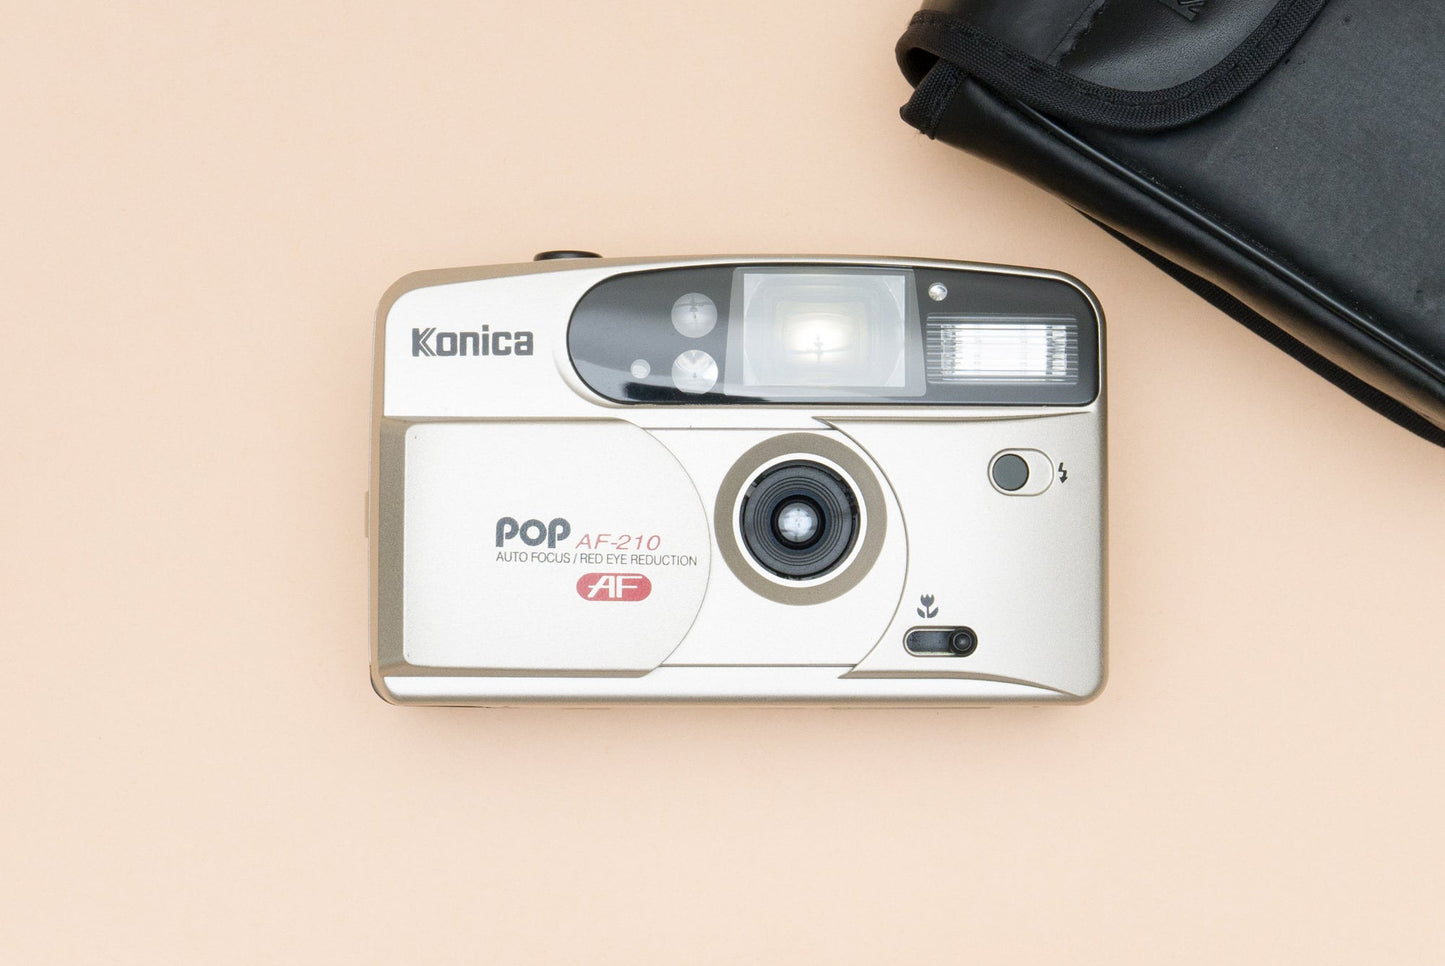 Konica POP AF-210 Compact 35mm Point and Shoot Film Camera